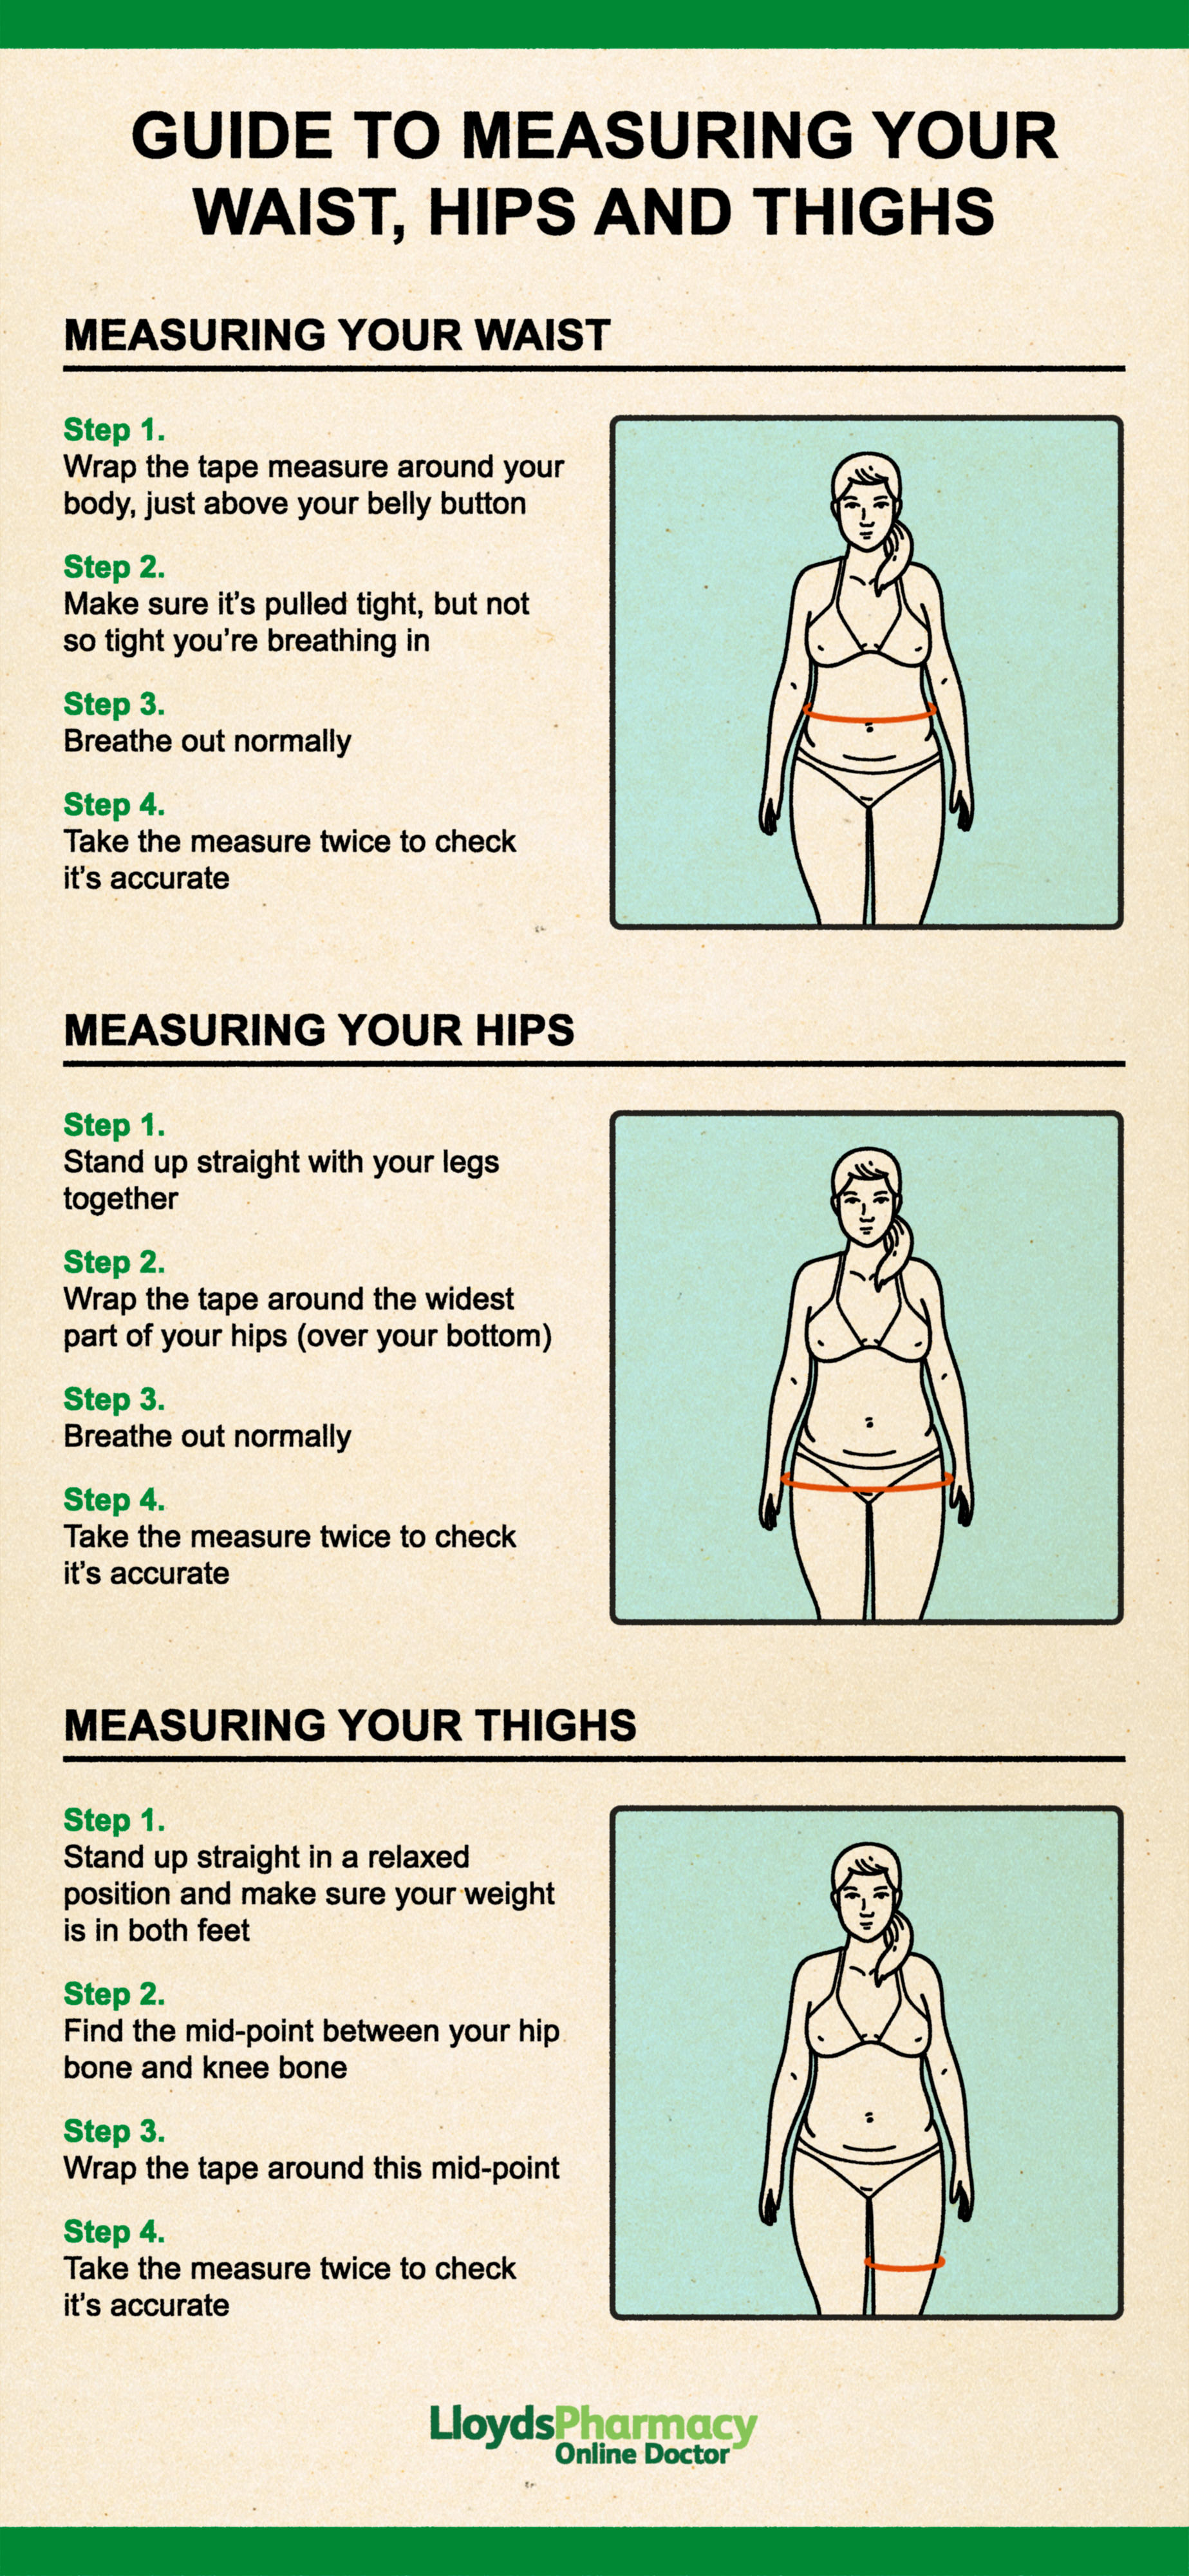 How To Get Smaller Waist and Bigger Hips? Small Waist Big Hips Guide